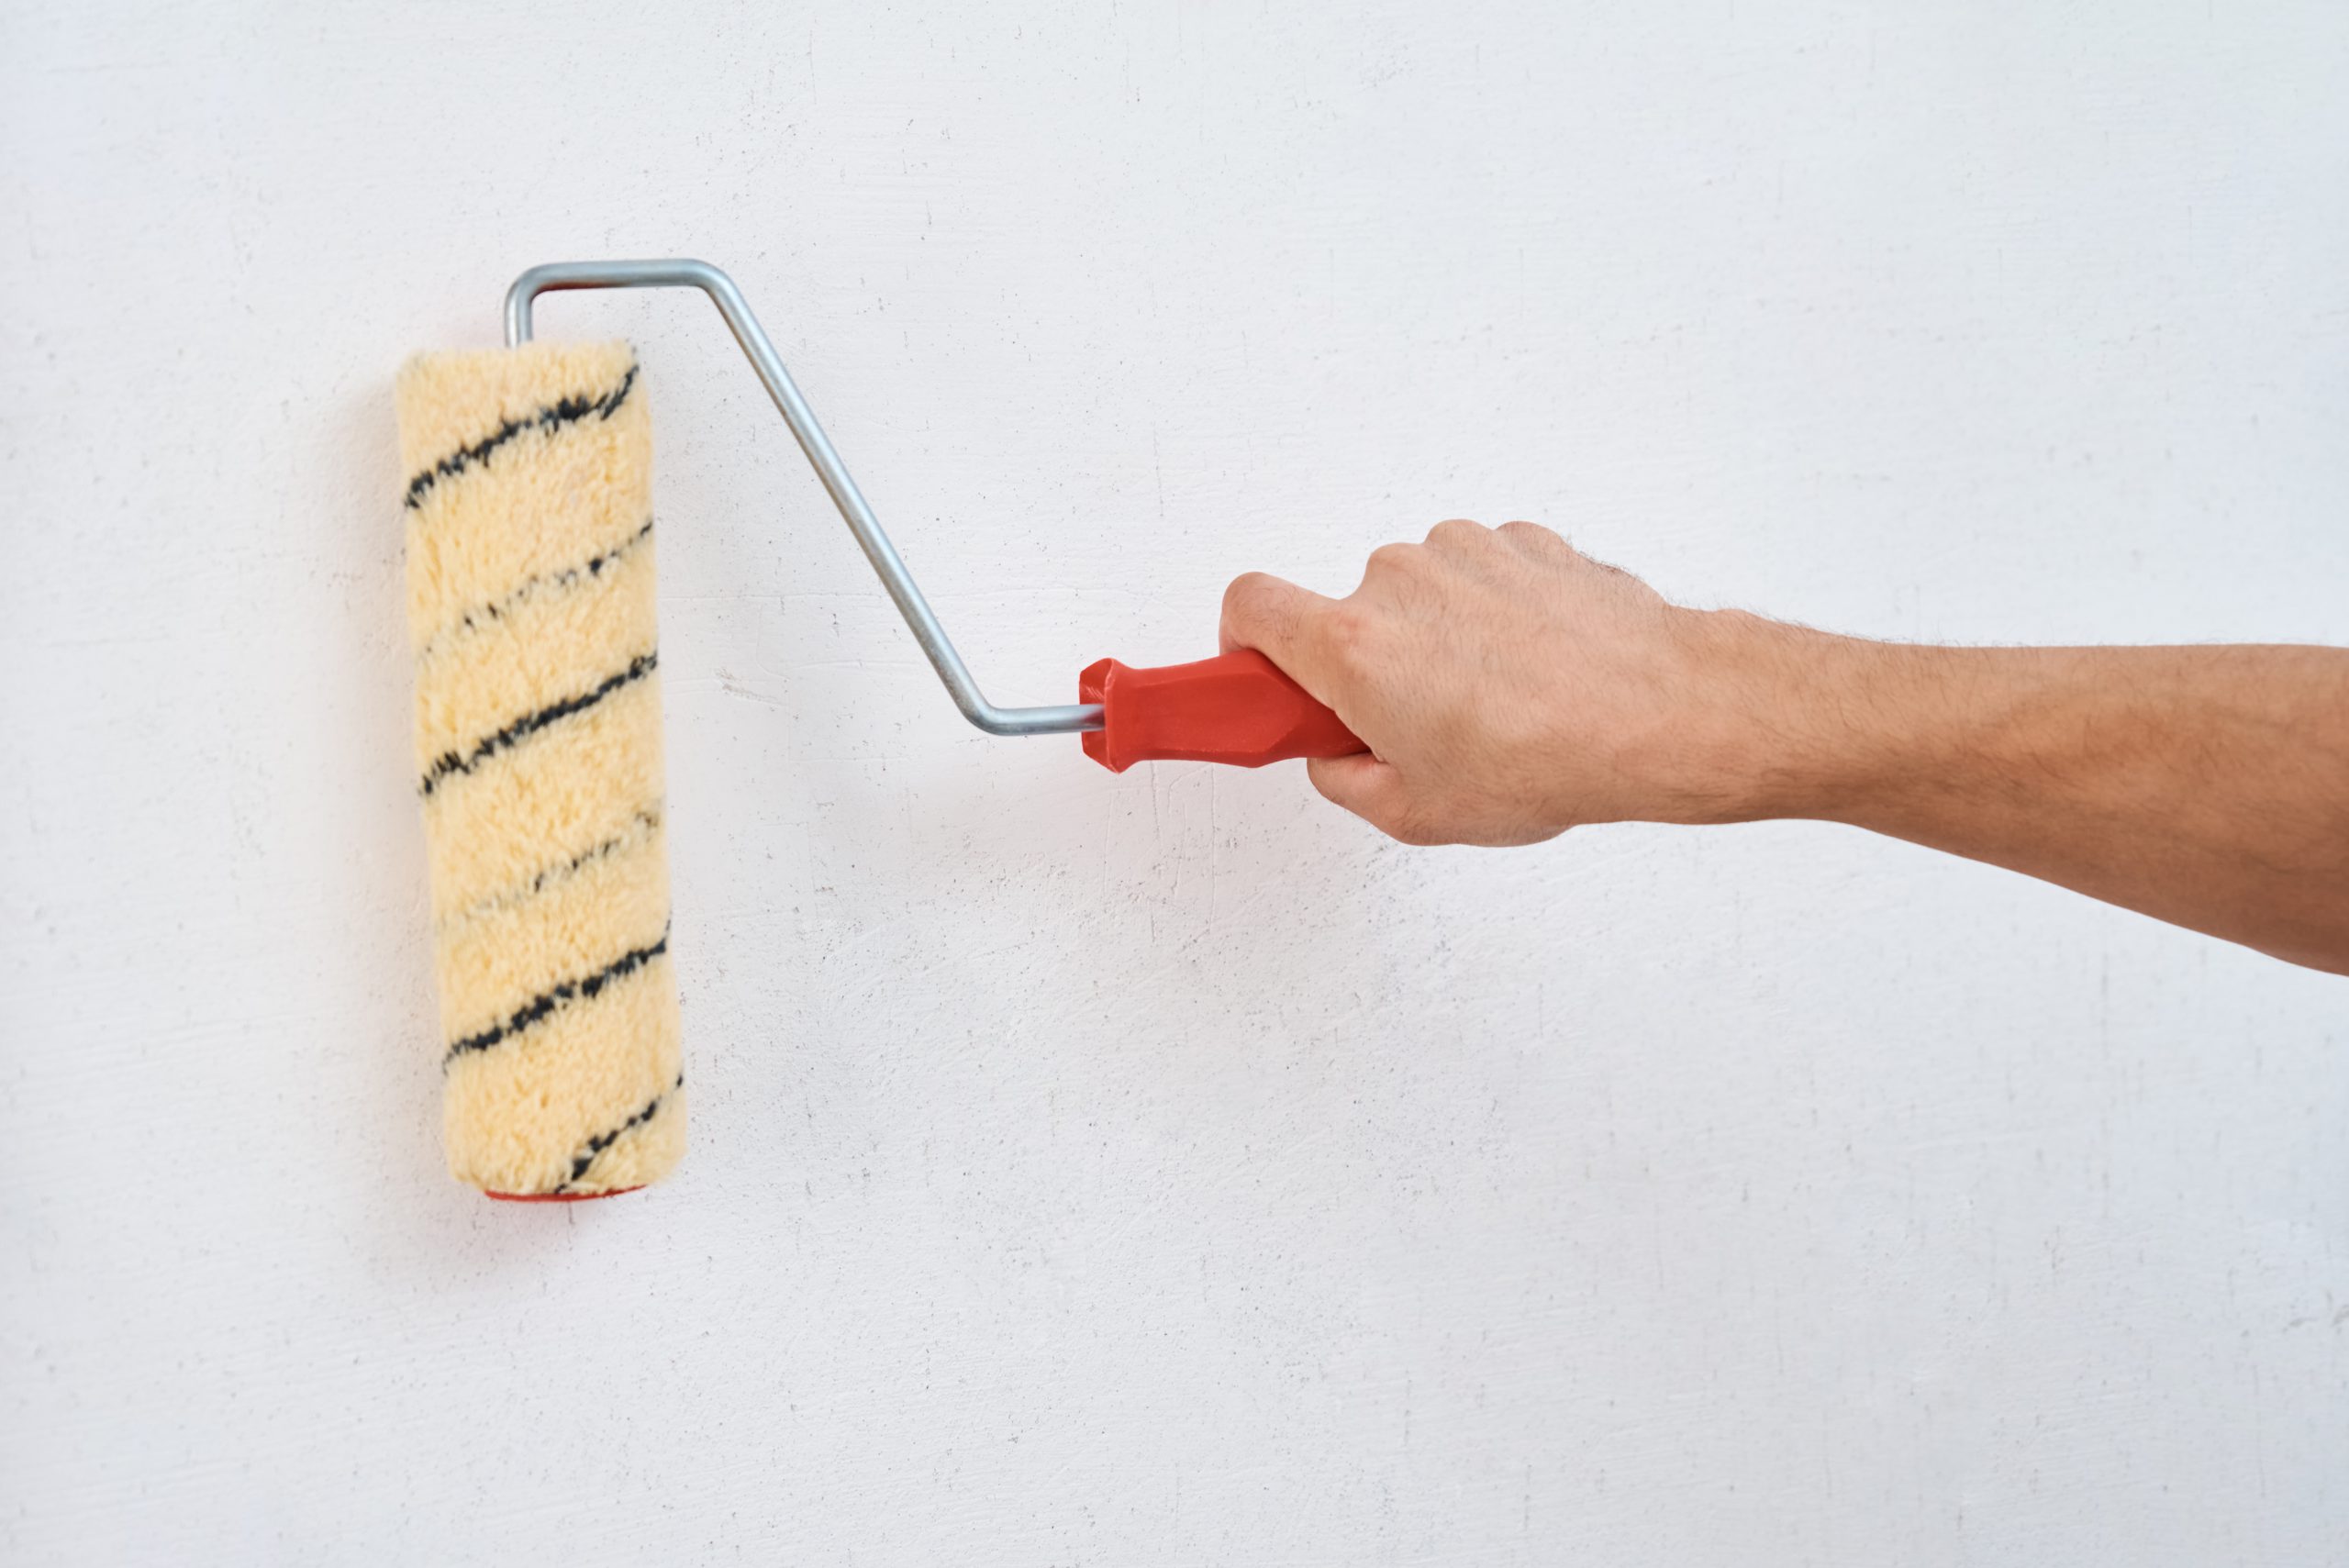 Man Painting Wall With Paint Roller